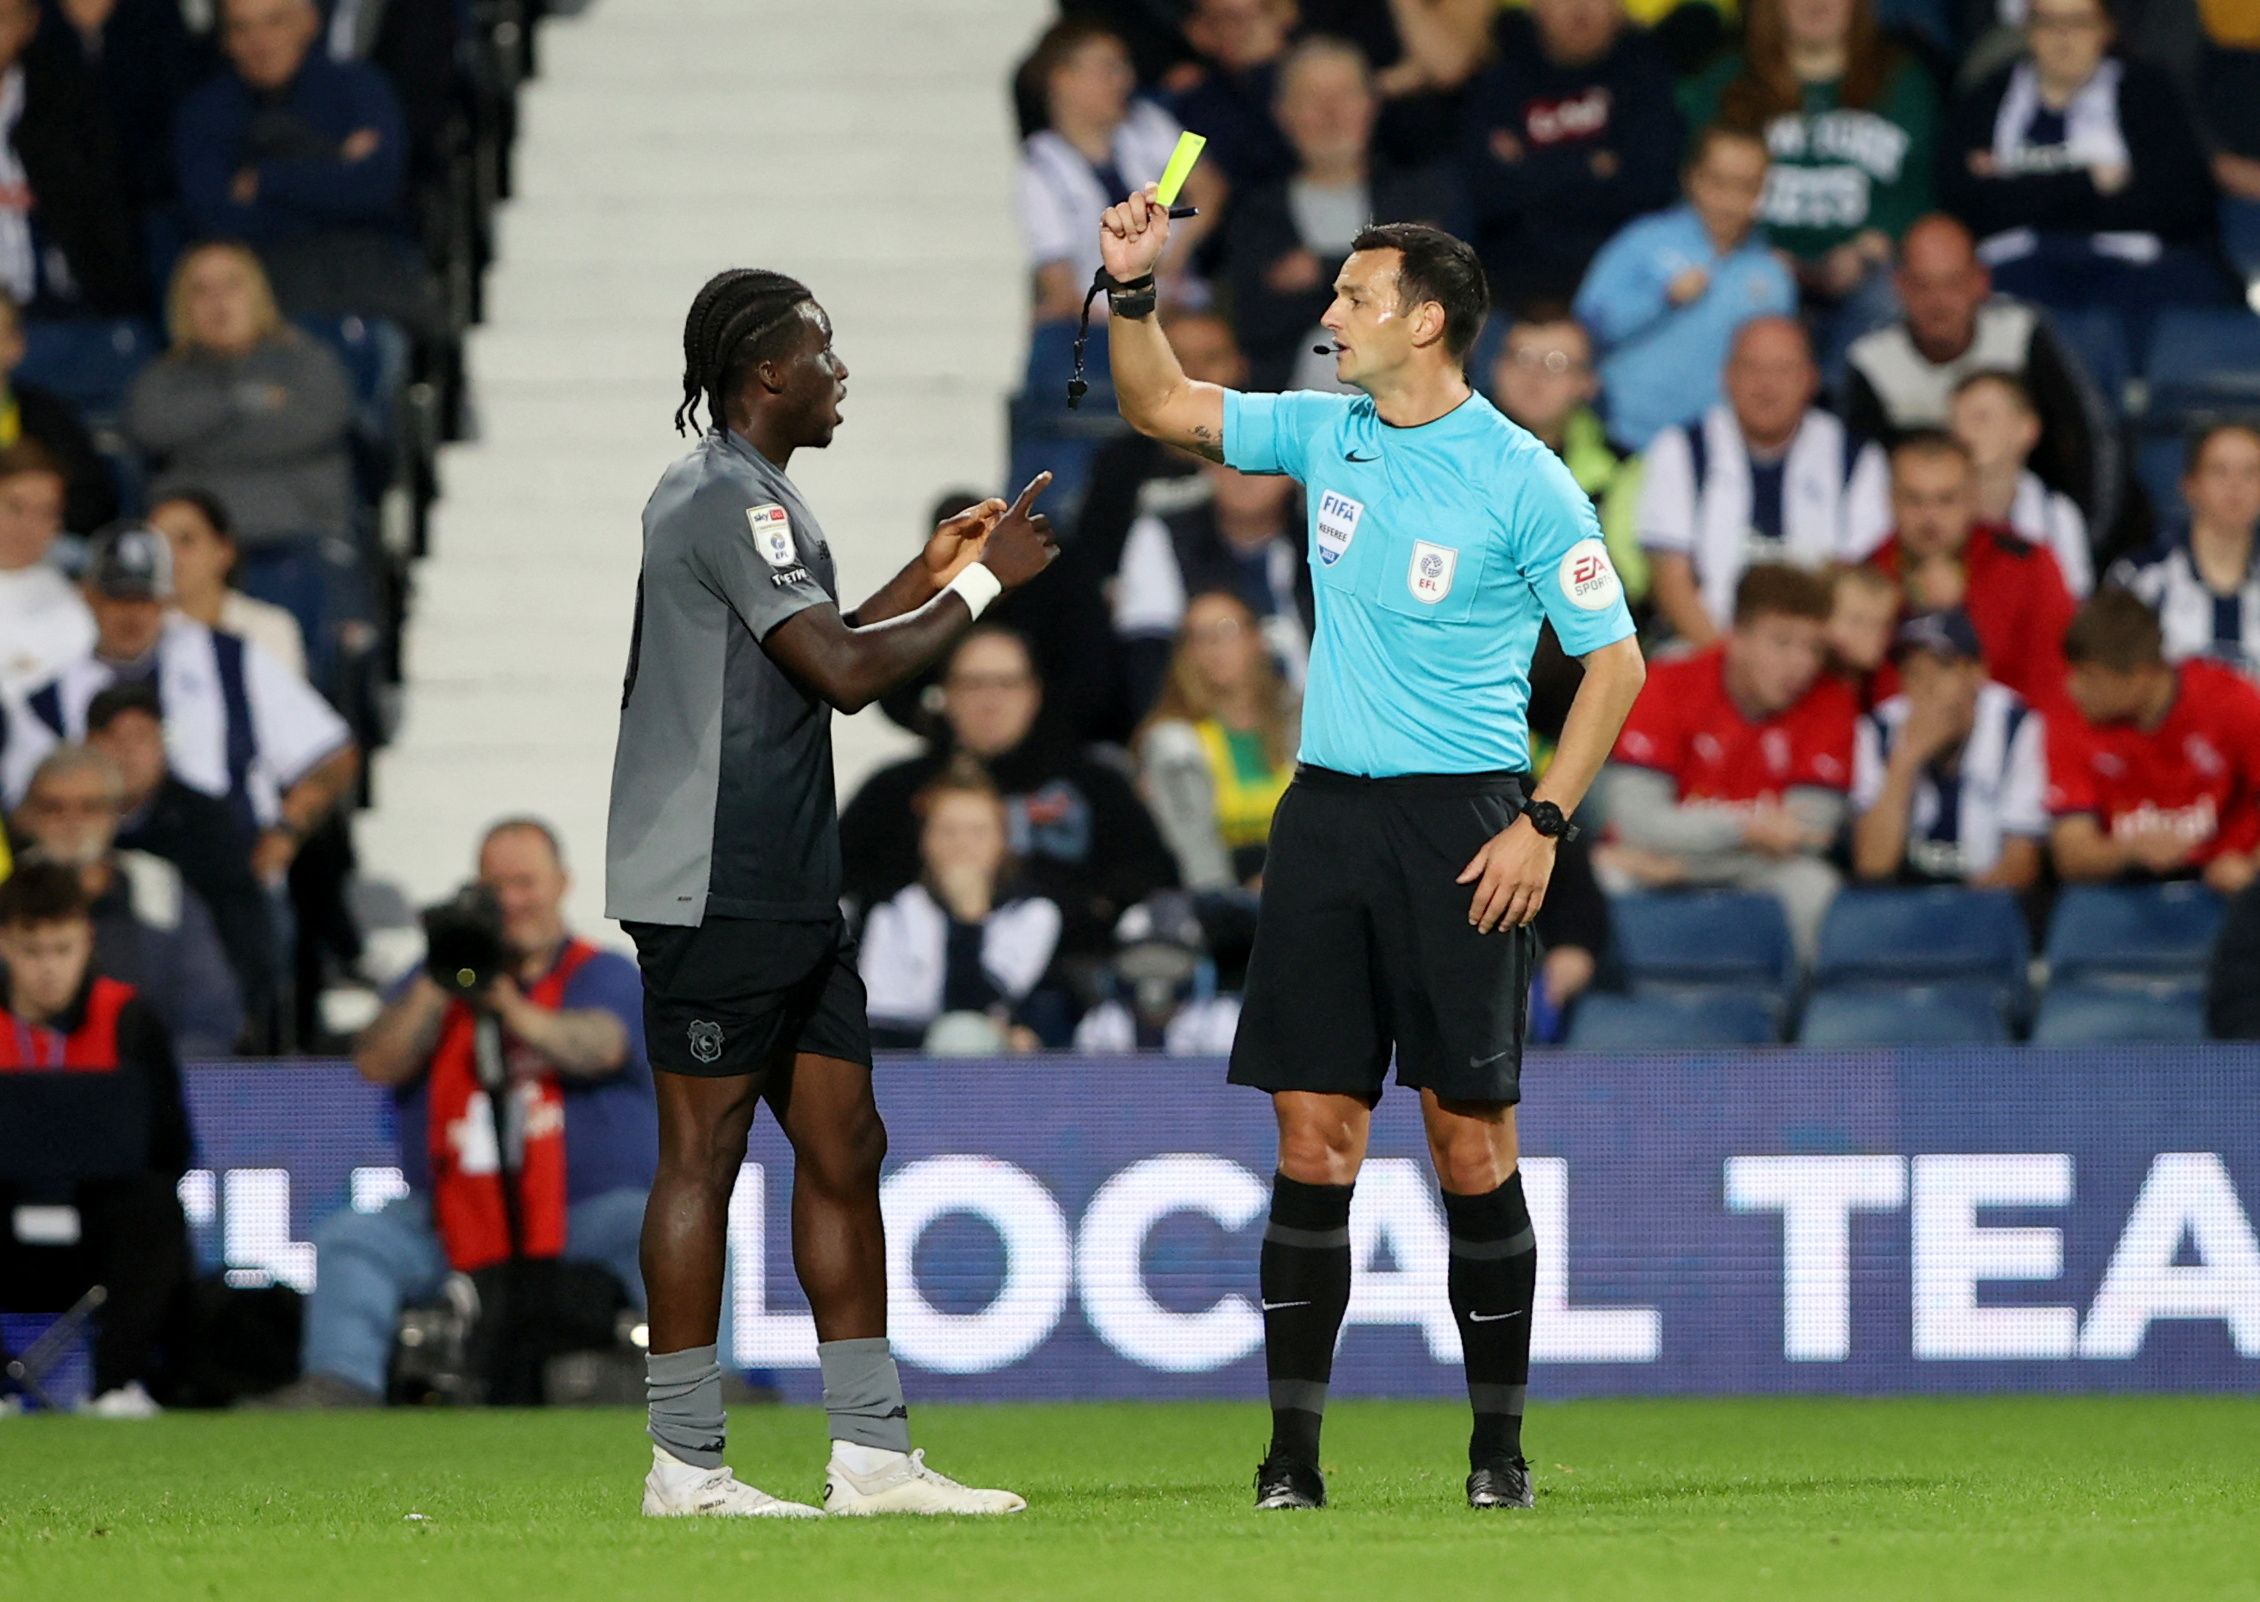 Soccer Football - Championship - West Bromwich Albion v Cardiff City - The Hawthorns, West Bromwich, Britain - August 17, 2022 Cardiff City's Sheyi Ojo is shown a yellow card by referee Action Images/Molly Darlington  EDITORIAL USE ONLY. No use with unauthorized audio, video, data, fixture lists, club/league logos or 